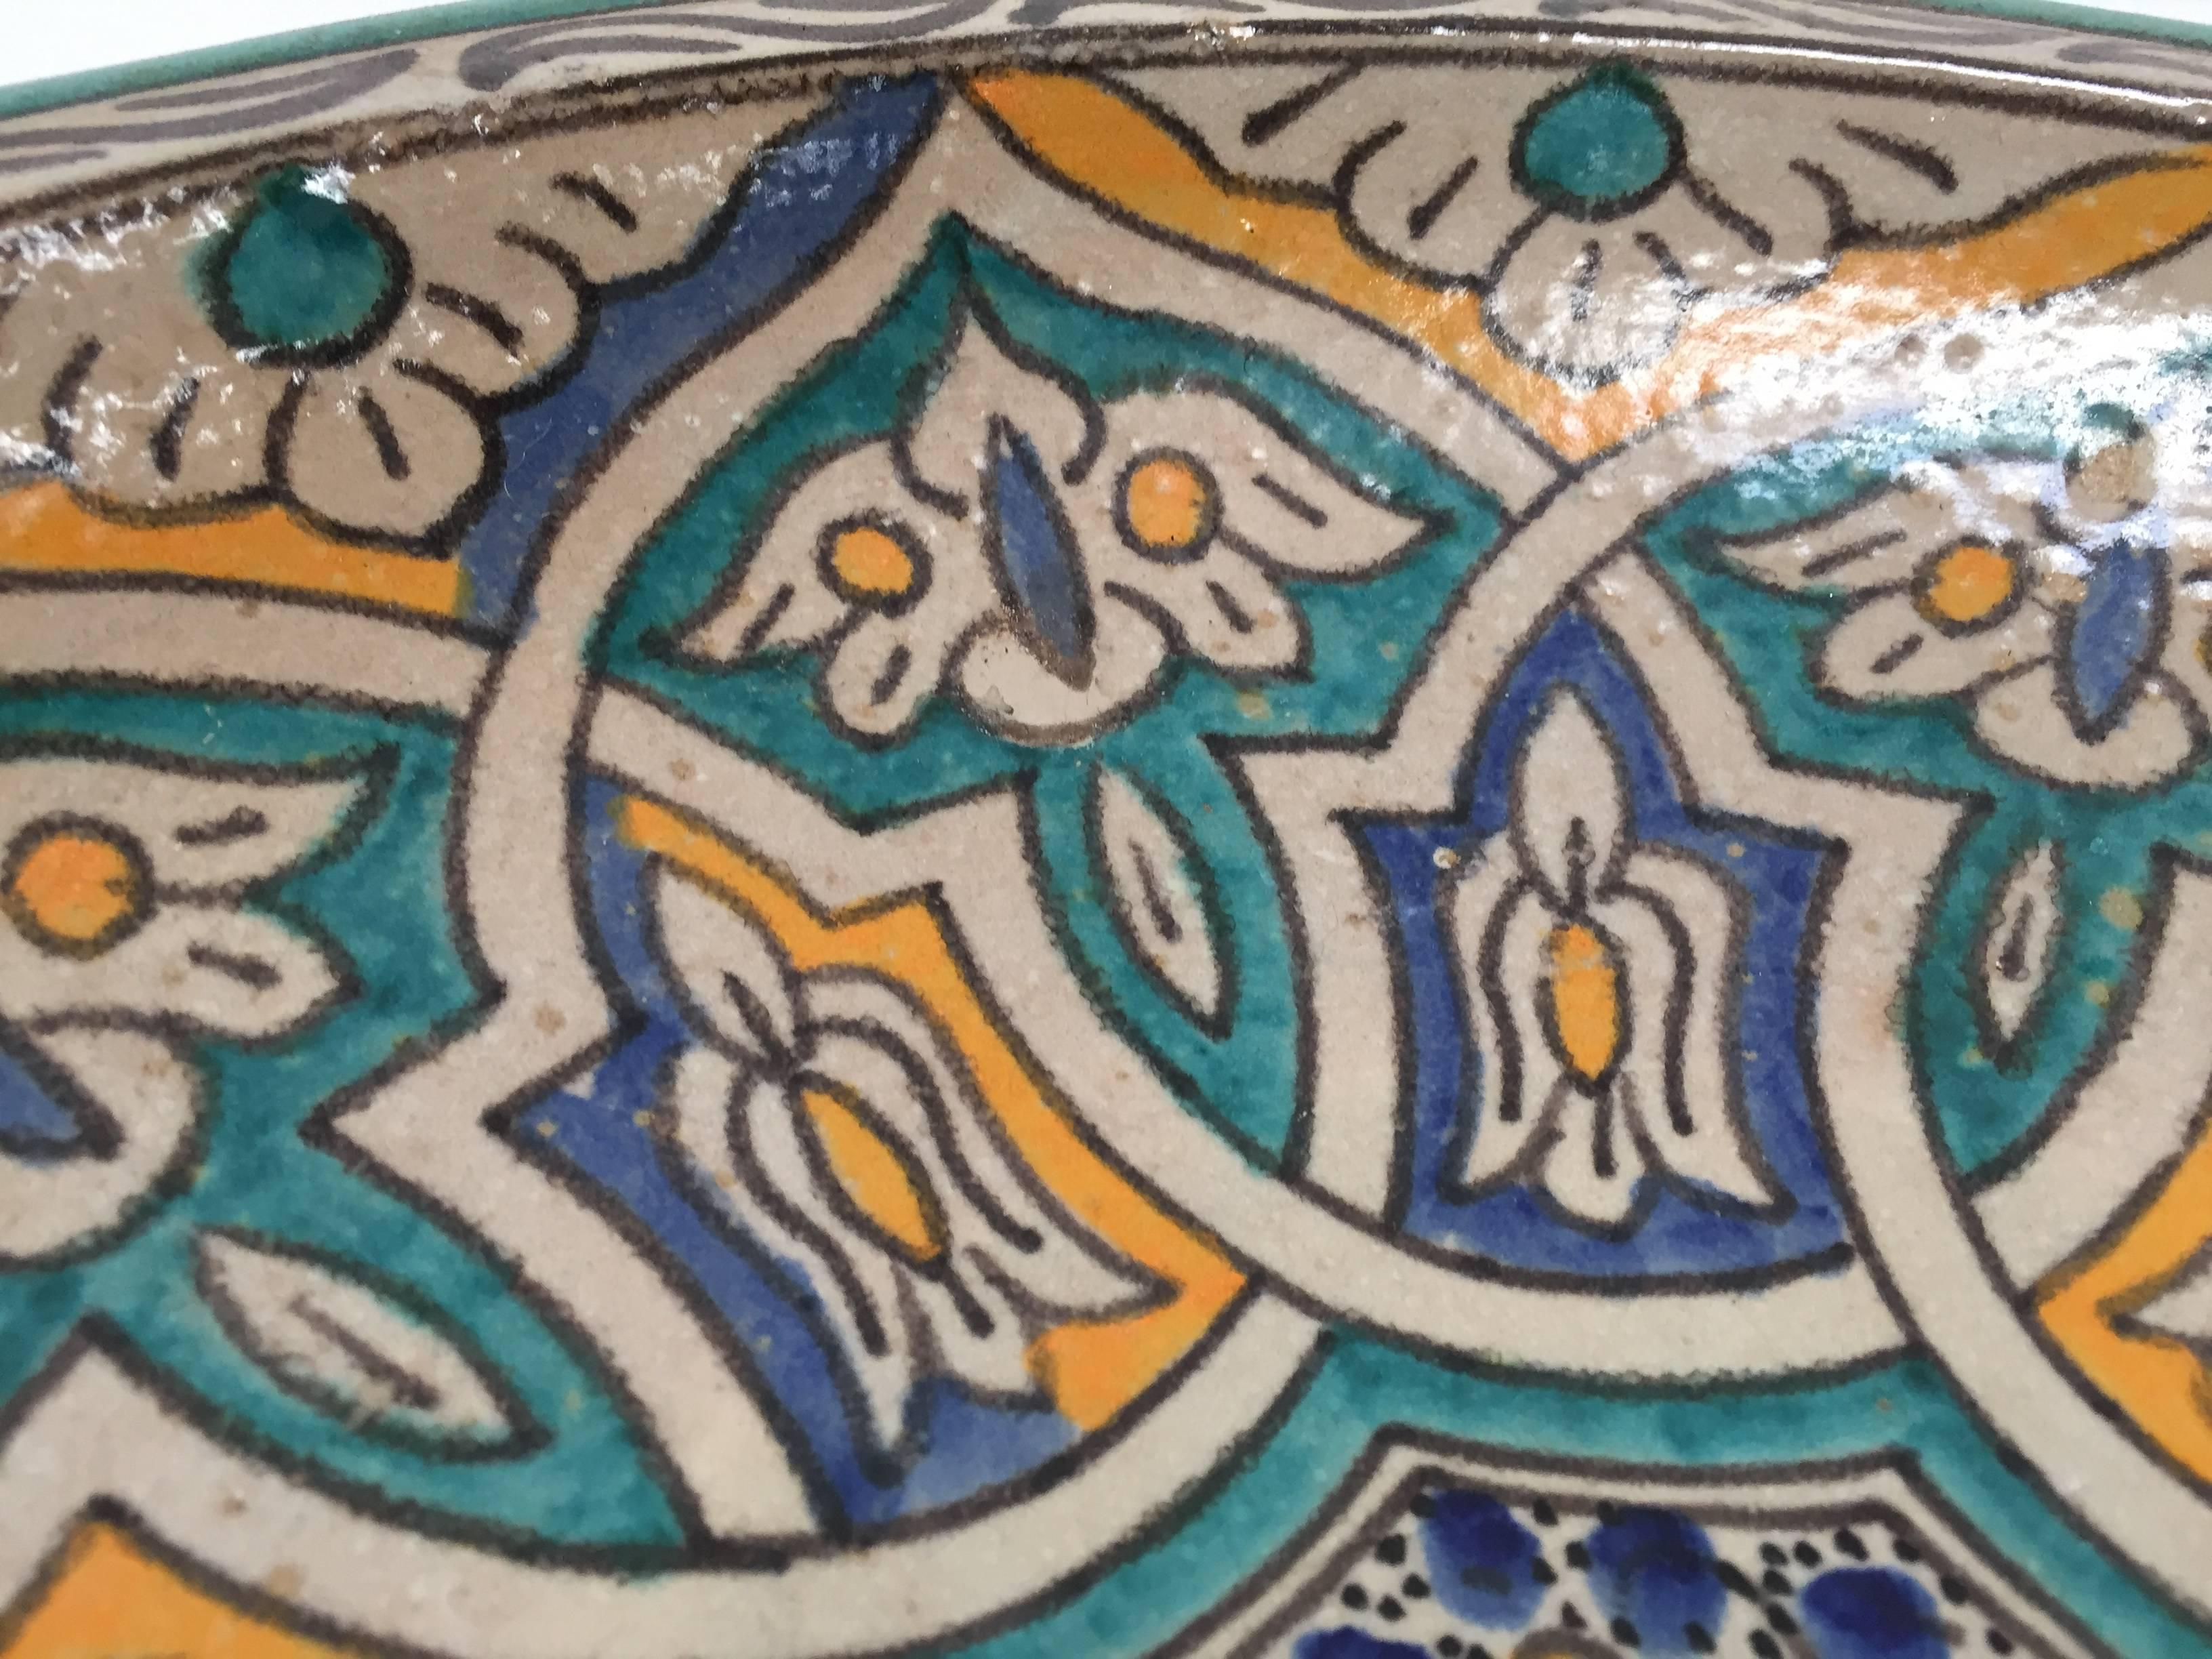 Hand-Crafted Moroccan Ceramic Bowl from Fez